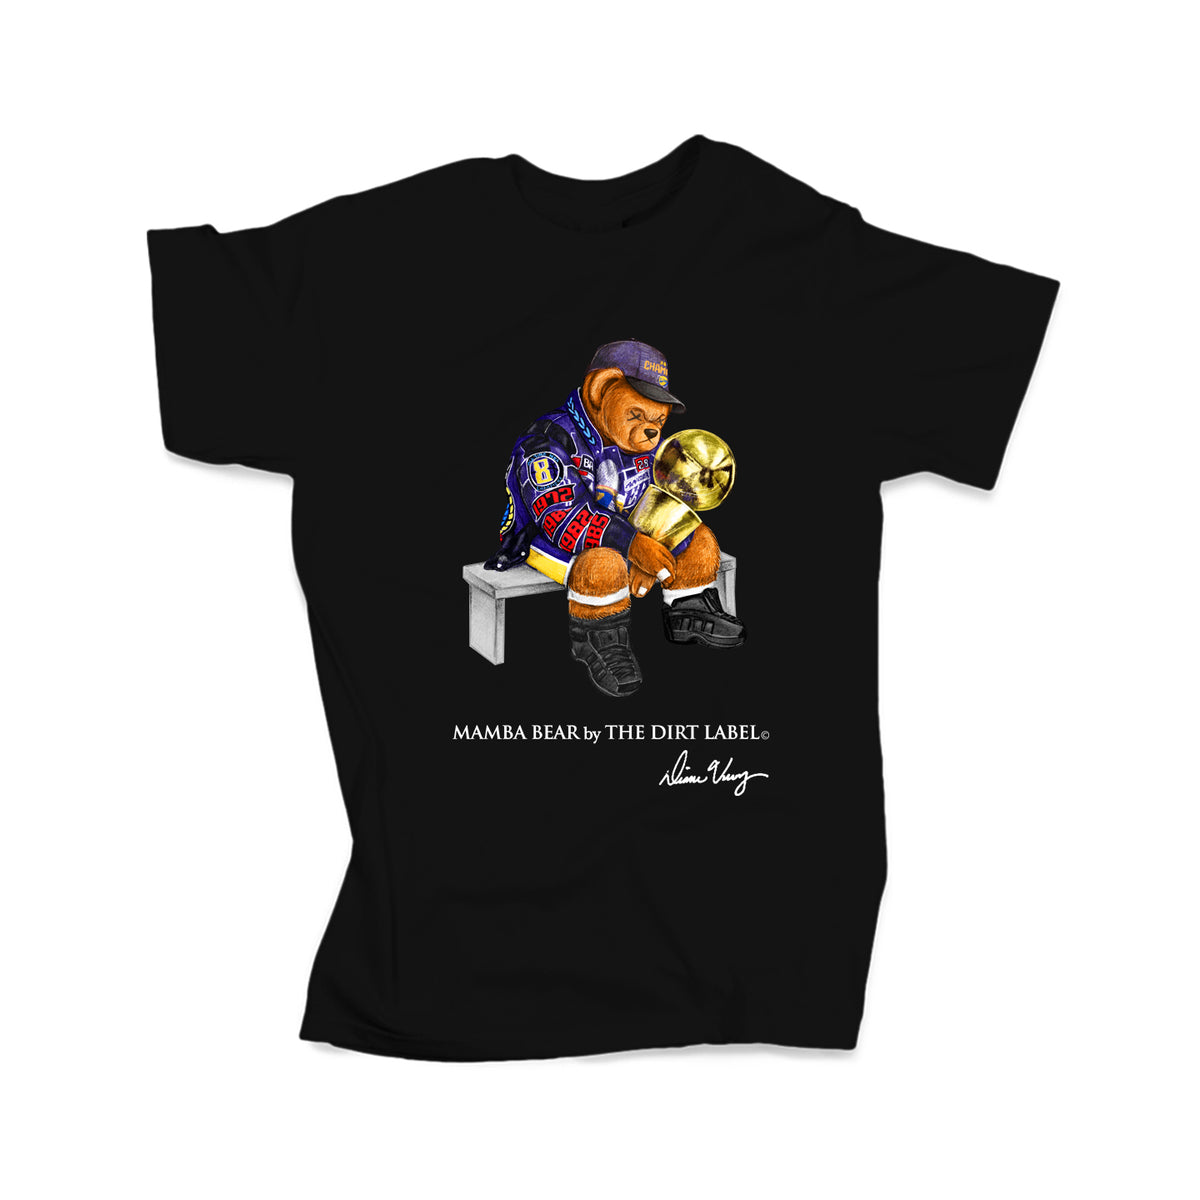 Mamba Bear Tee (Limited Edition) – The Dirt Label